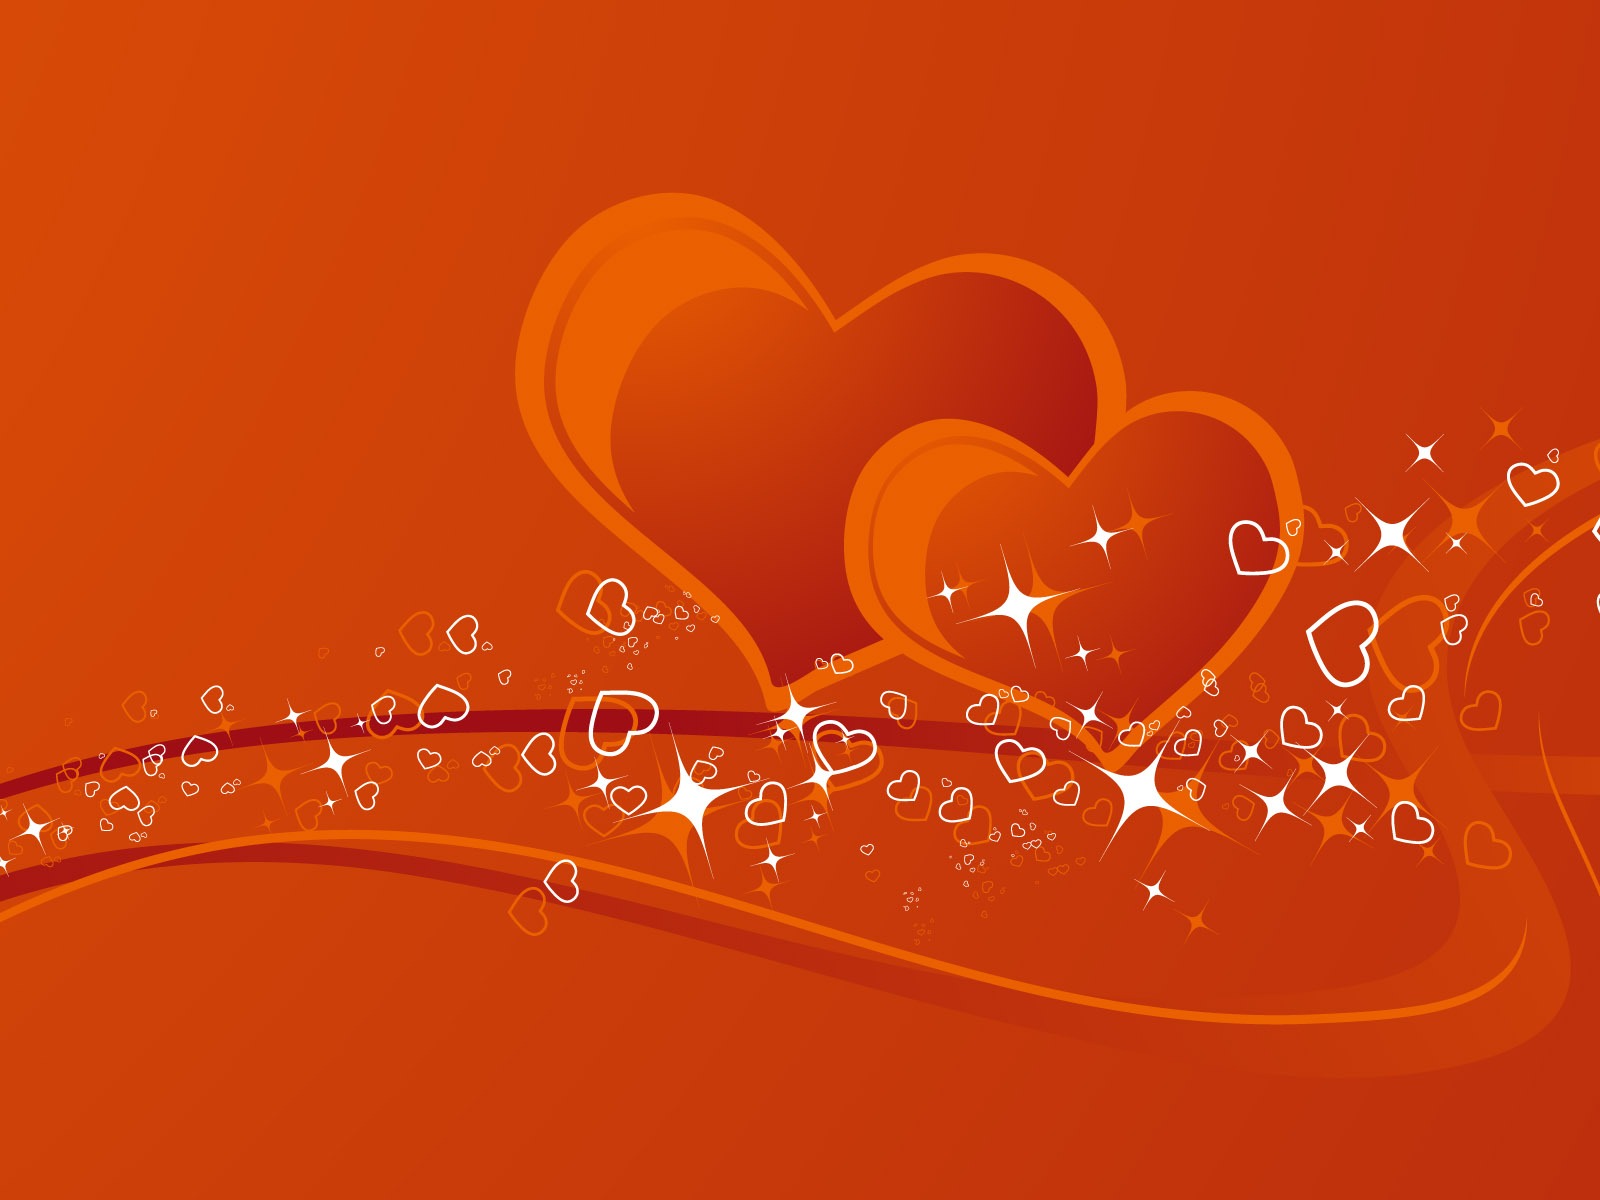 Valentine's Day Love Theme Wallpapers #25 - 1600x1200